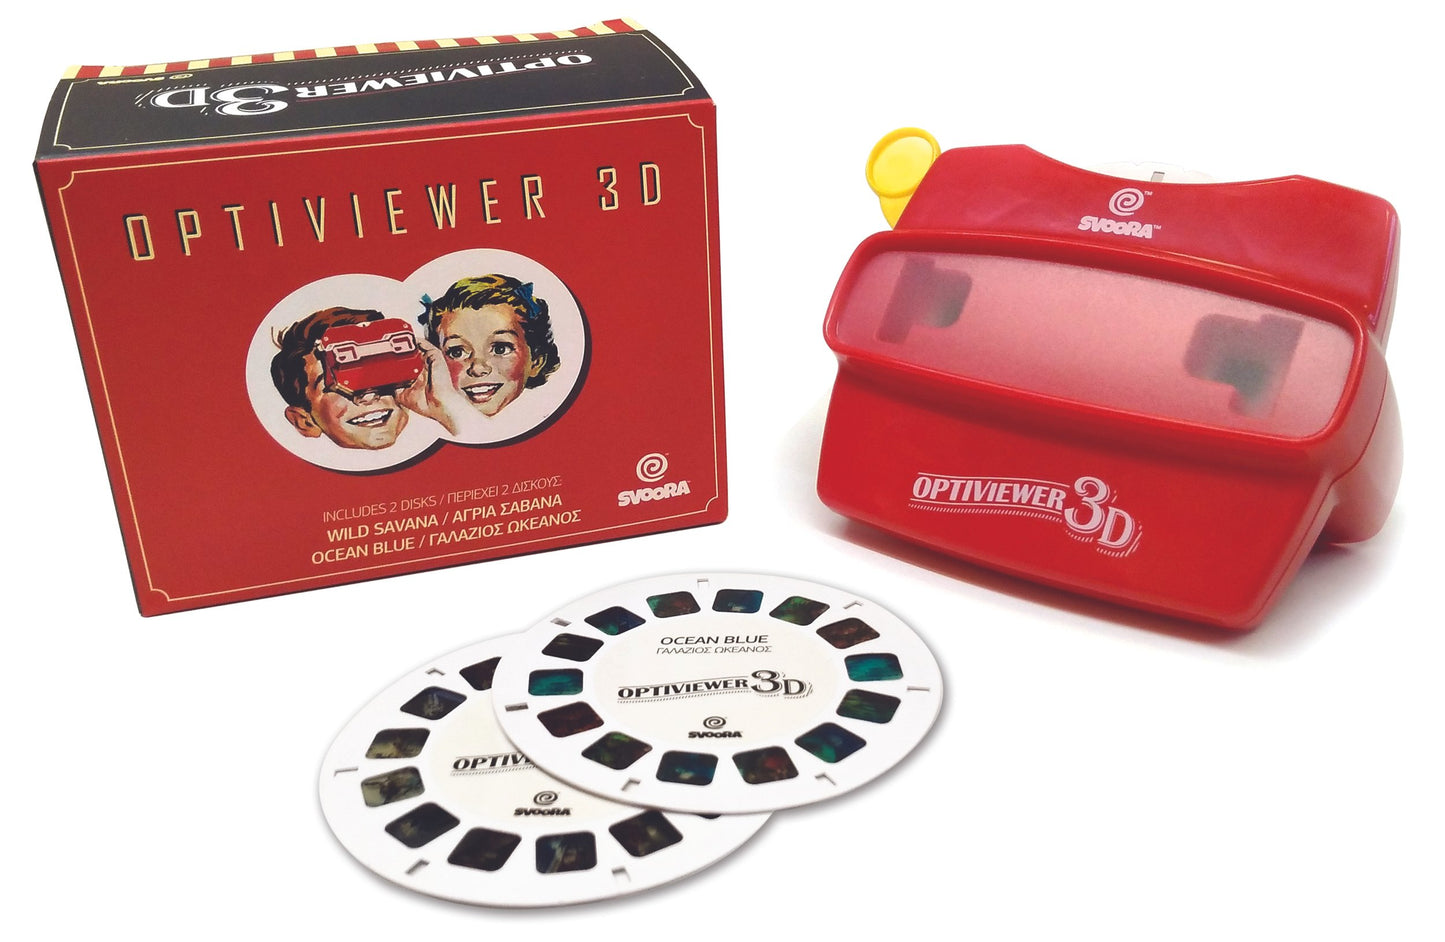 3D Optiviewer with 2 Reels